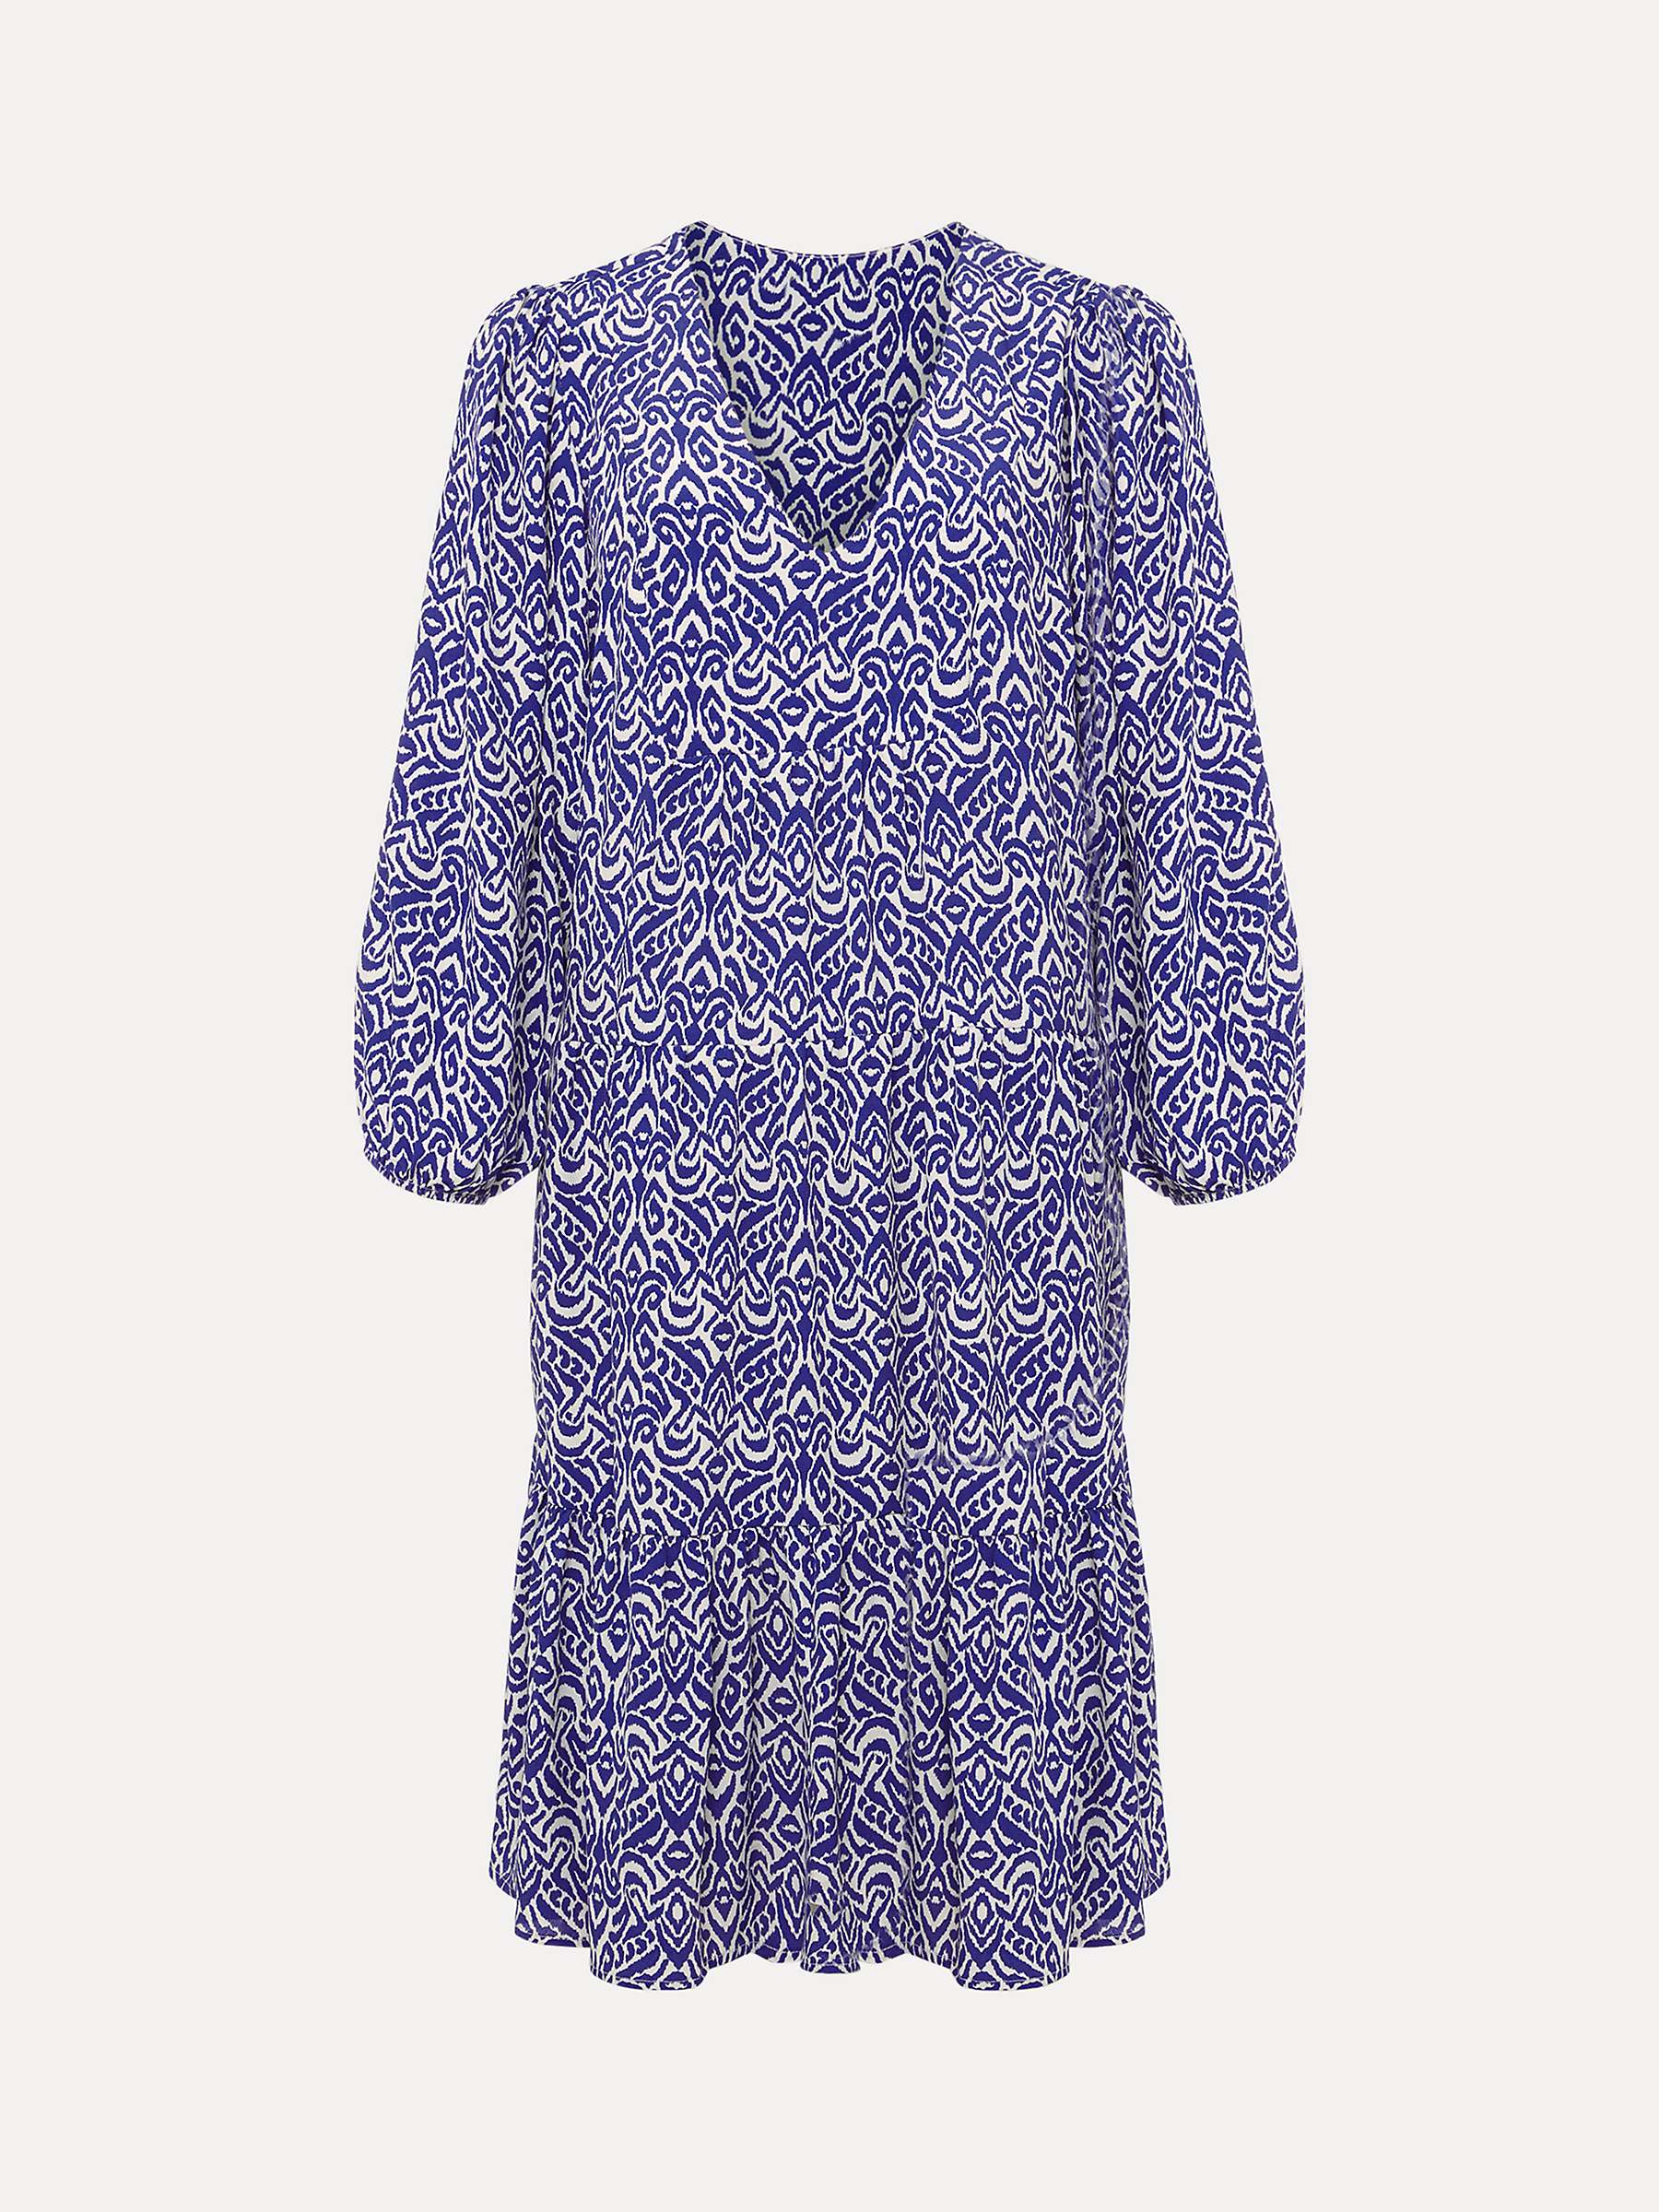 Buy Phase Eight Alicia Ikat Swing Dress, Blue/Ivory Online at johnlewis.com